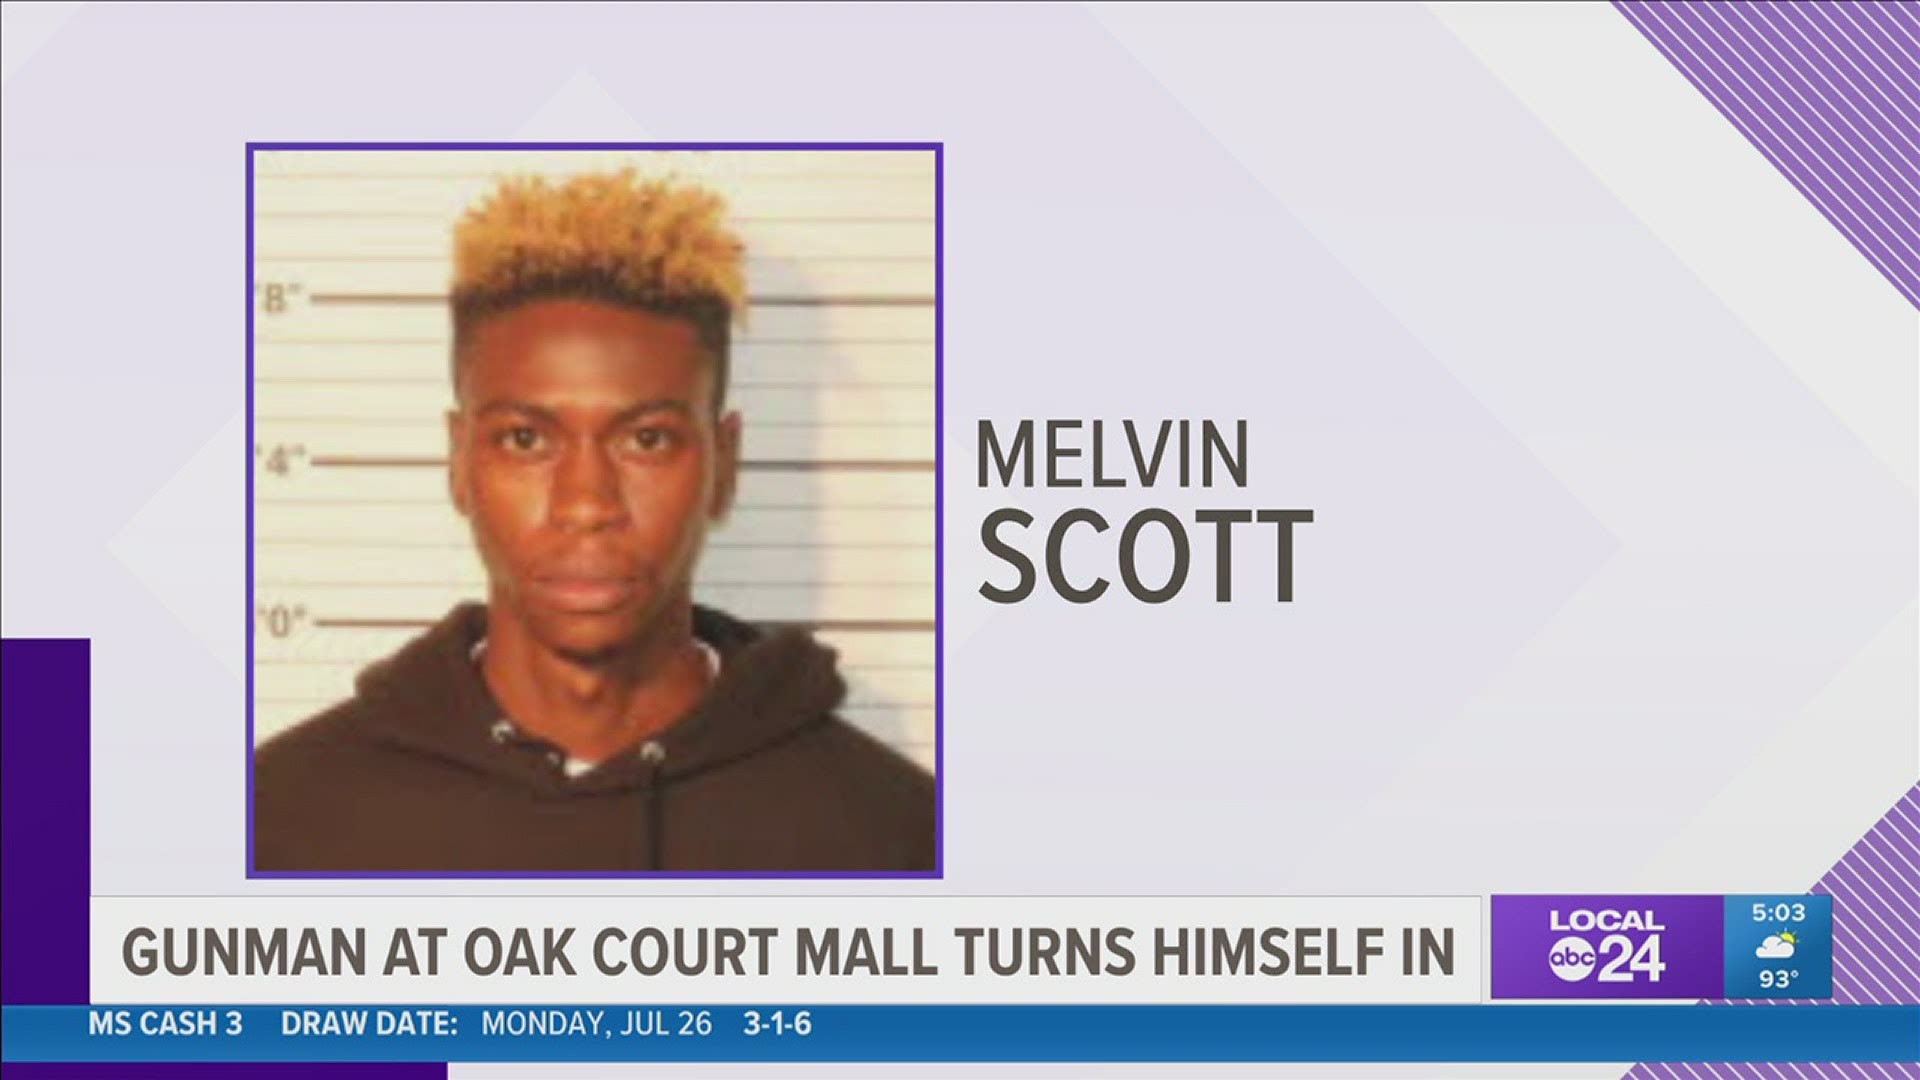 Memphis Police said Melvin Scott is charged with attempted aggravated assault, evading arrest, tampering with evidence, and more.